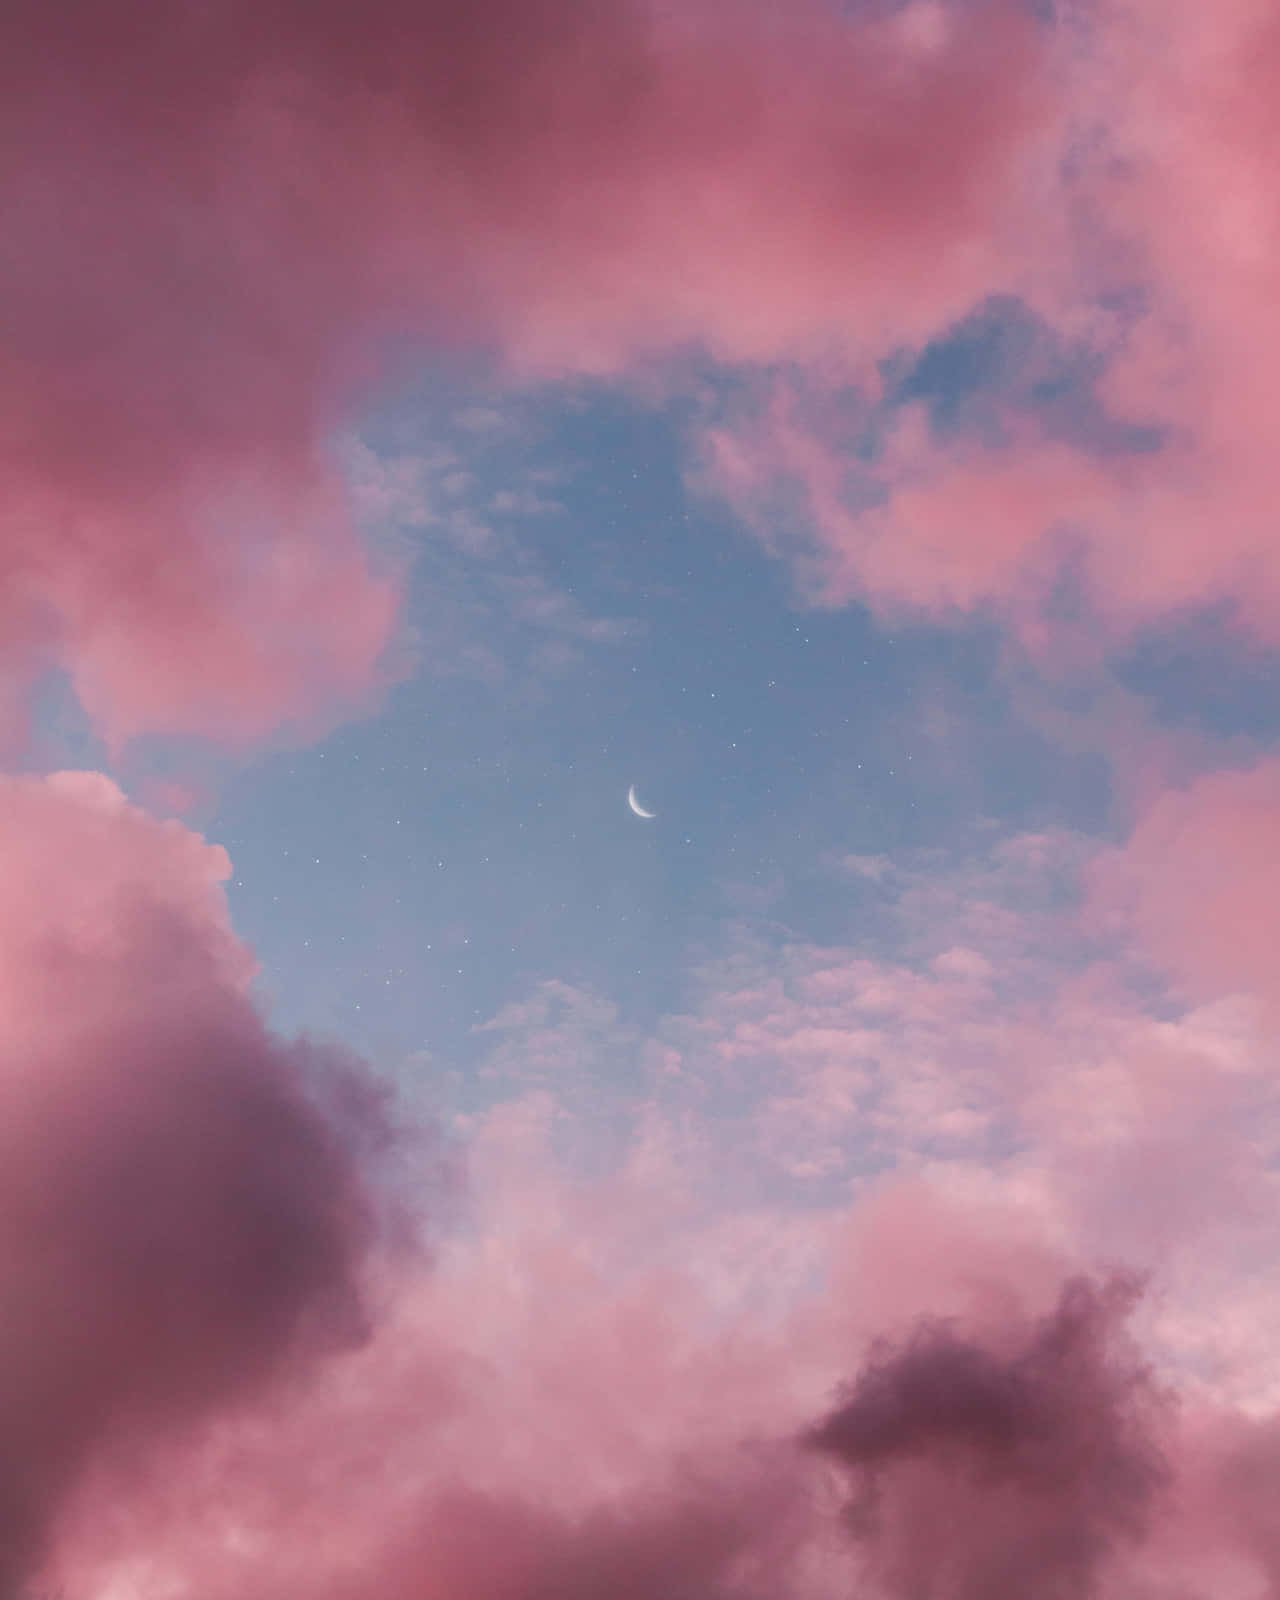 A dreamy view of the sky and white fluffy clouds